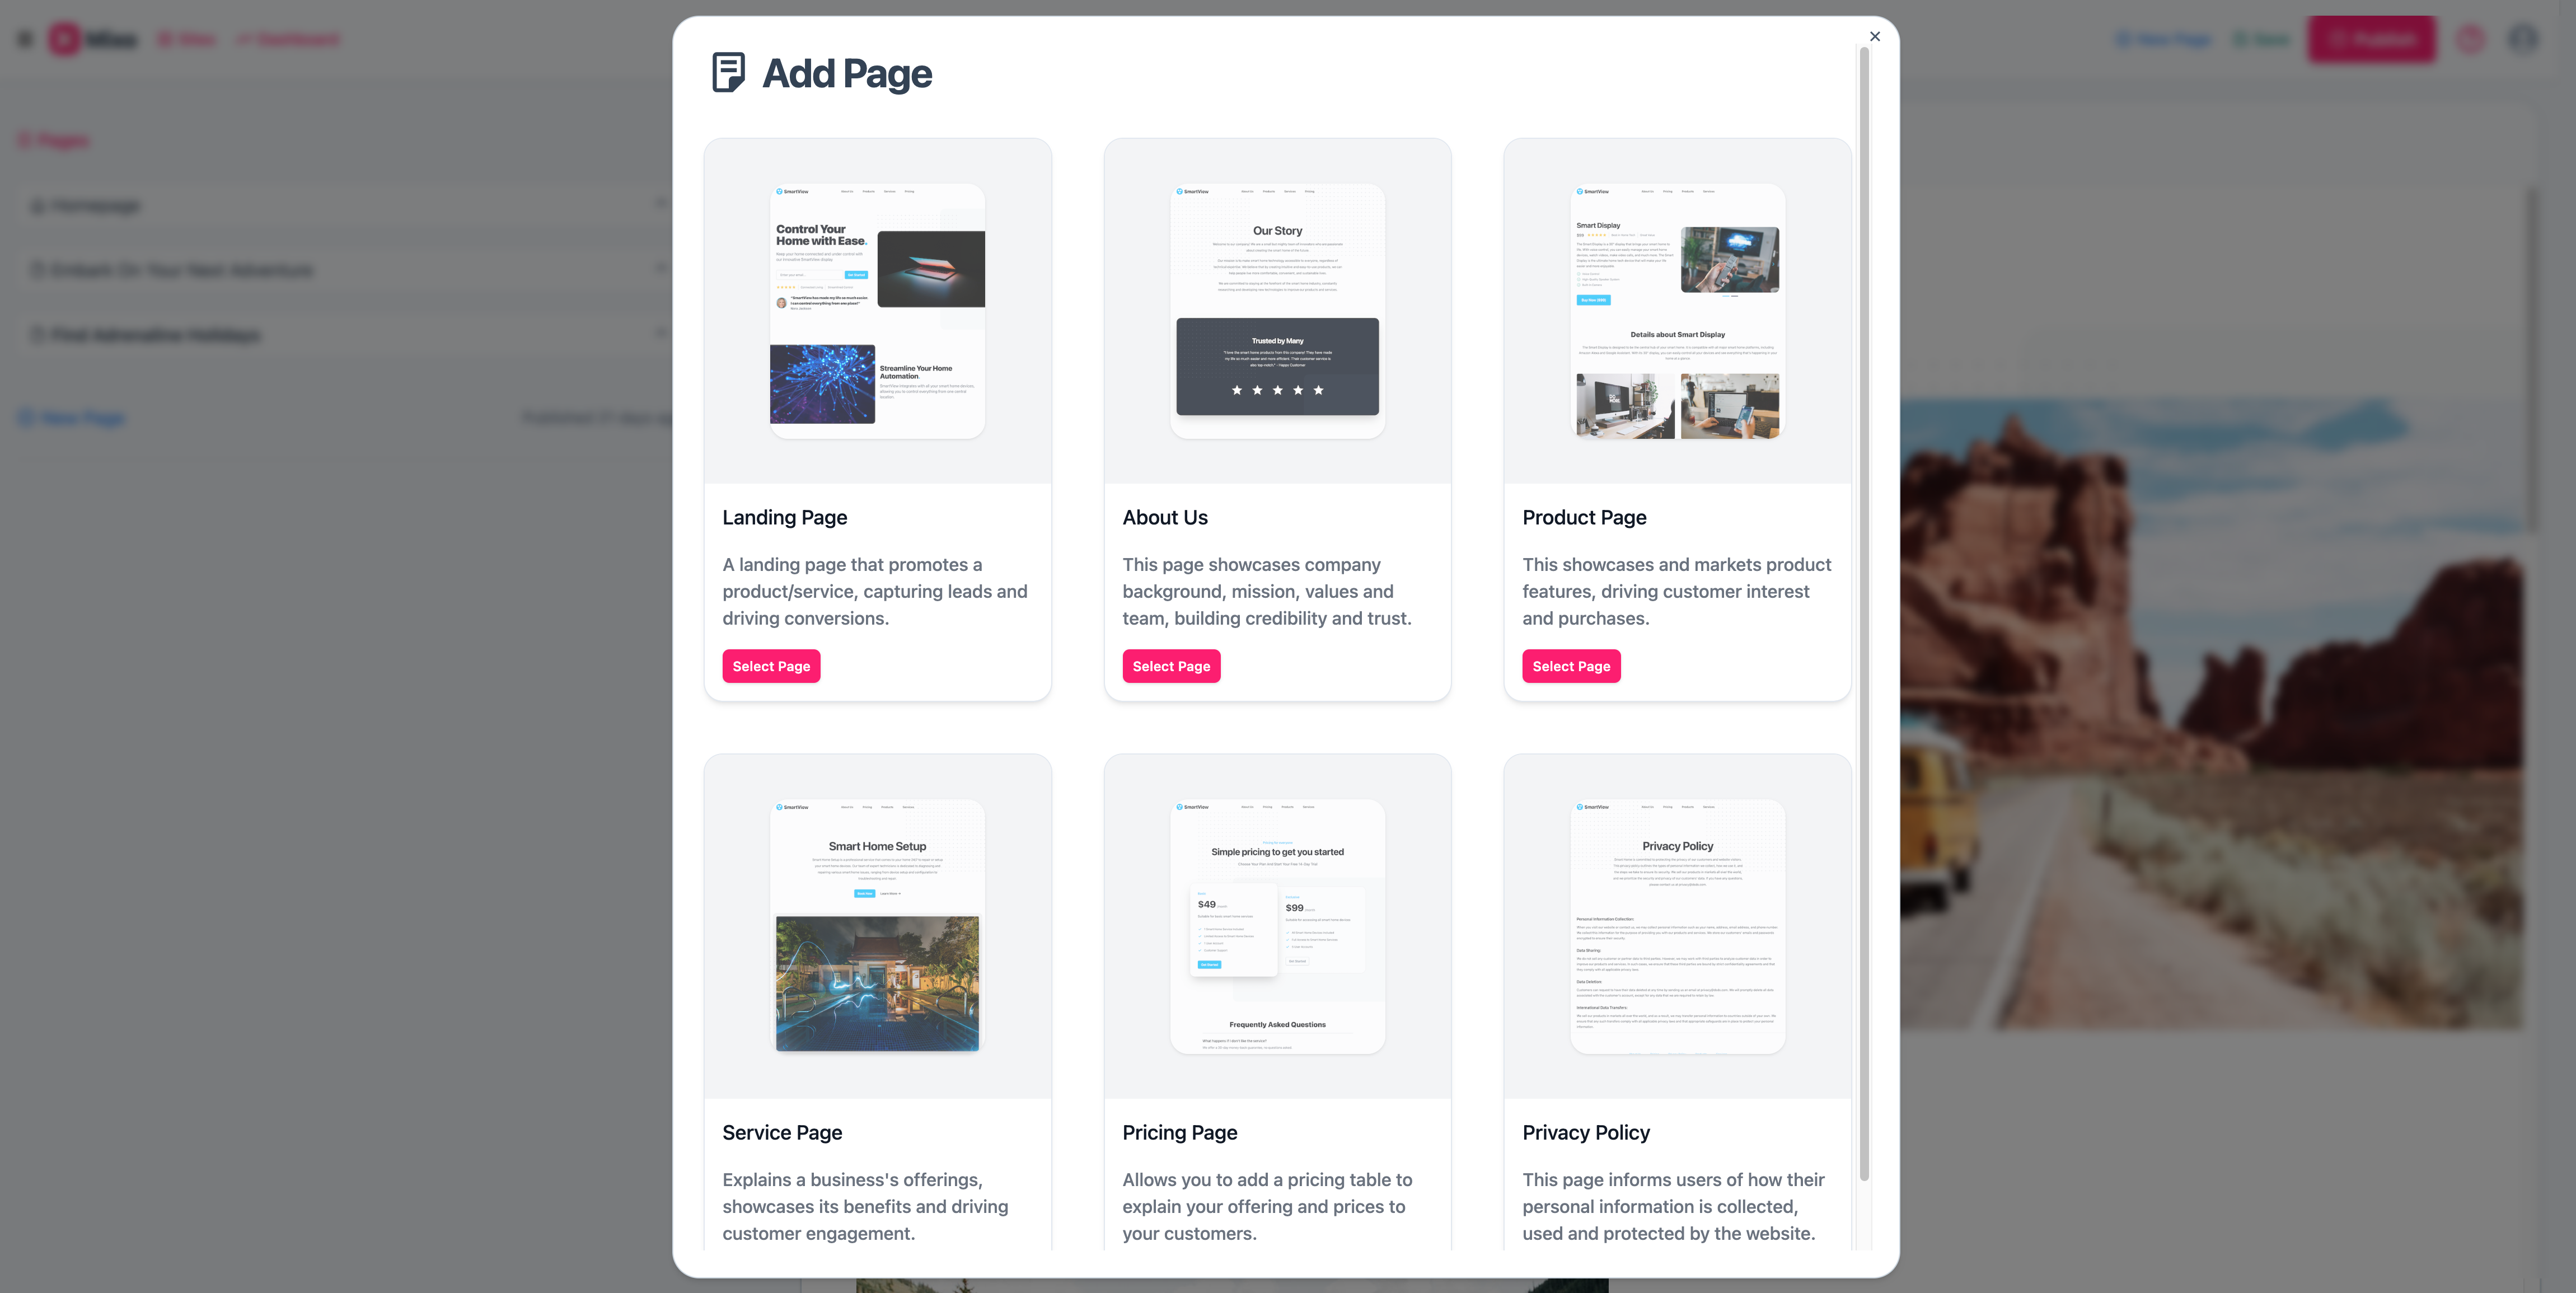 AI that lets generates inner pages: Mixo's AI can auto-generate unique, SEO-optimized inner pages based on a business description or product/service detail.